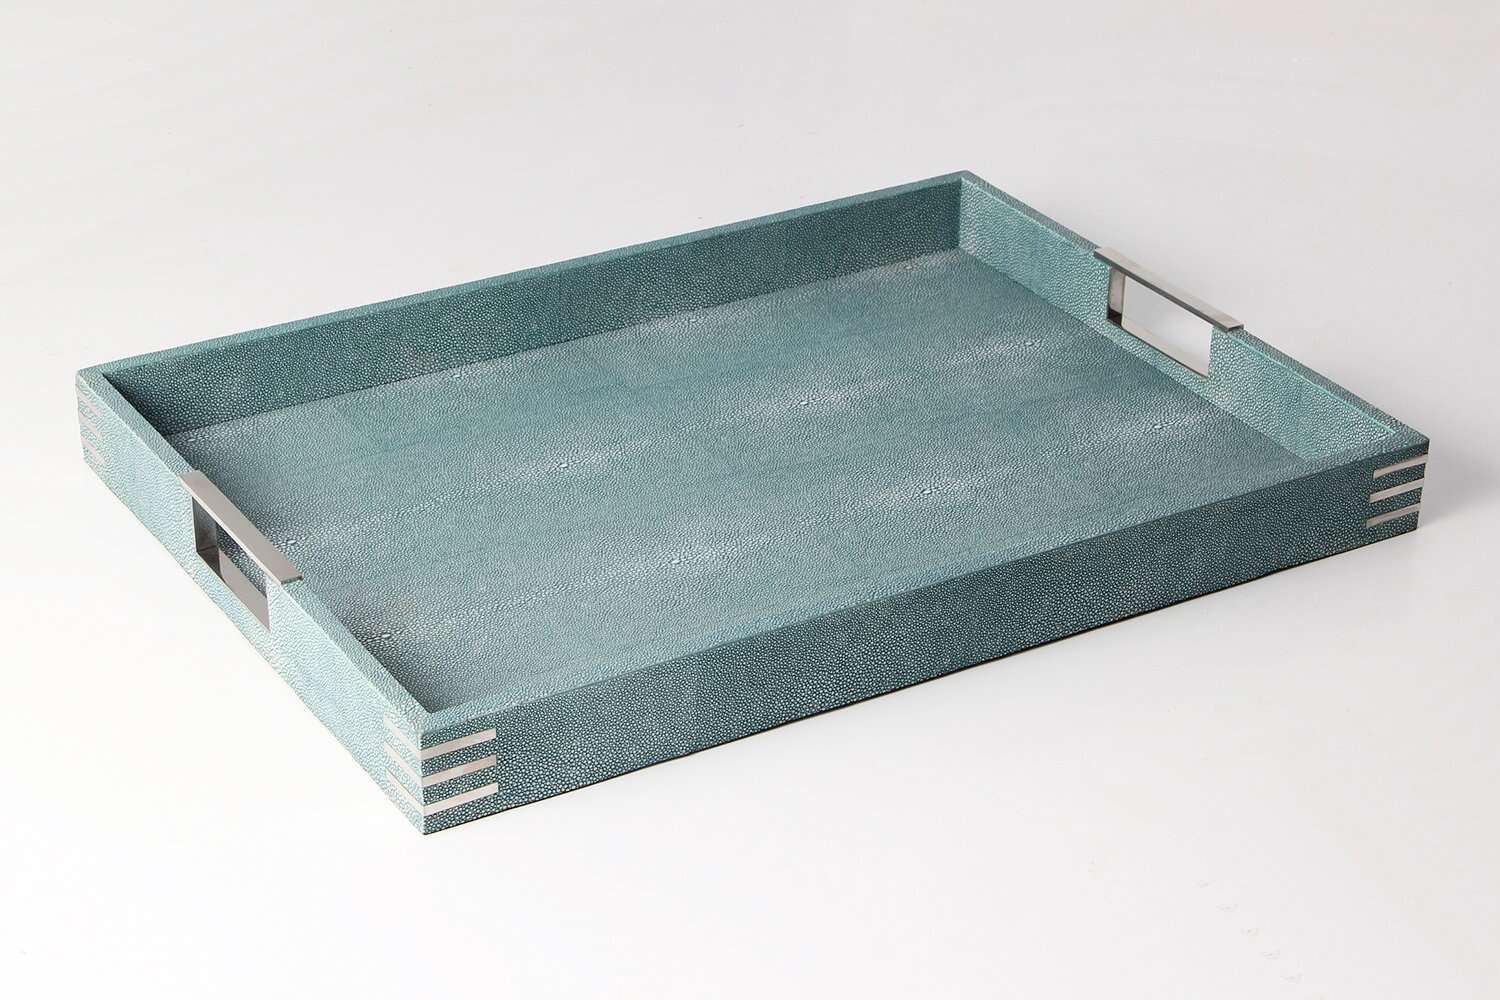 Teal shagreen serving tray drinks tray